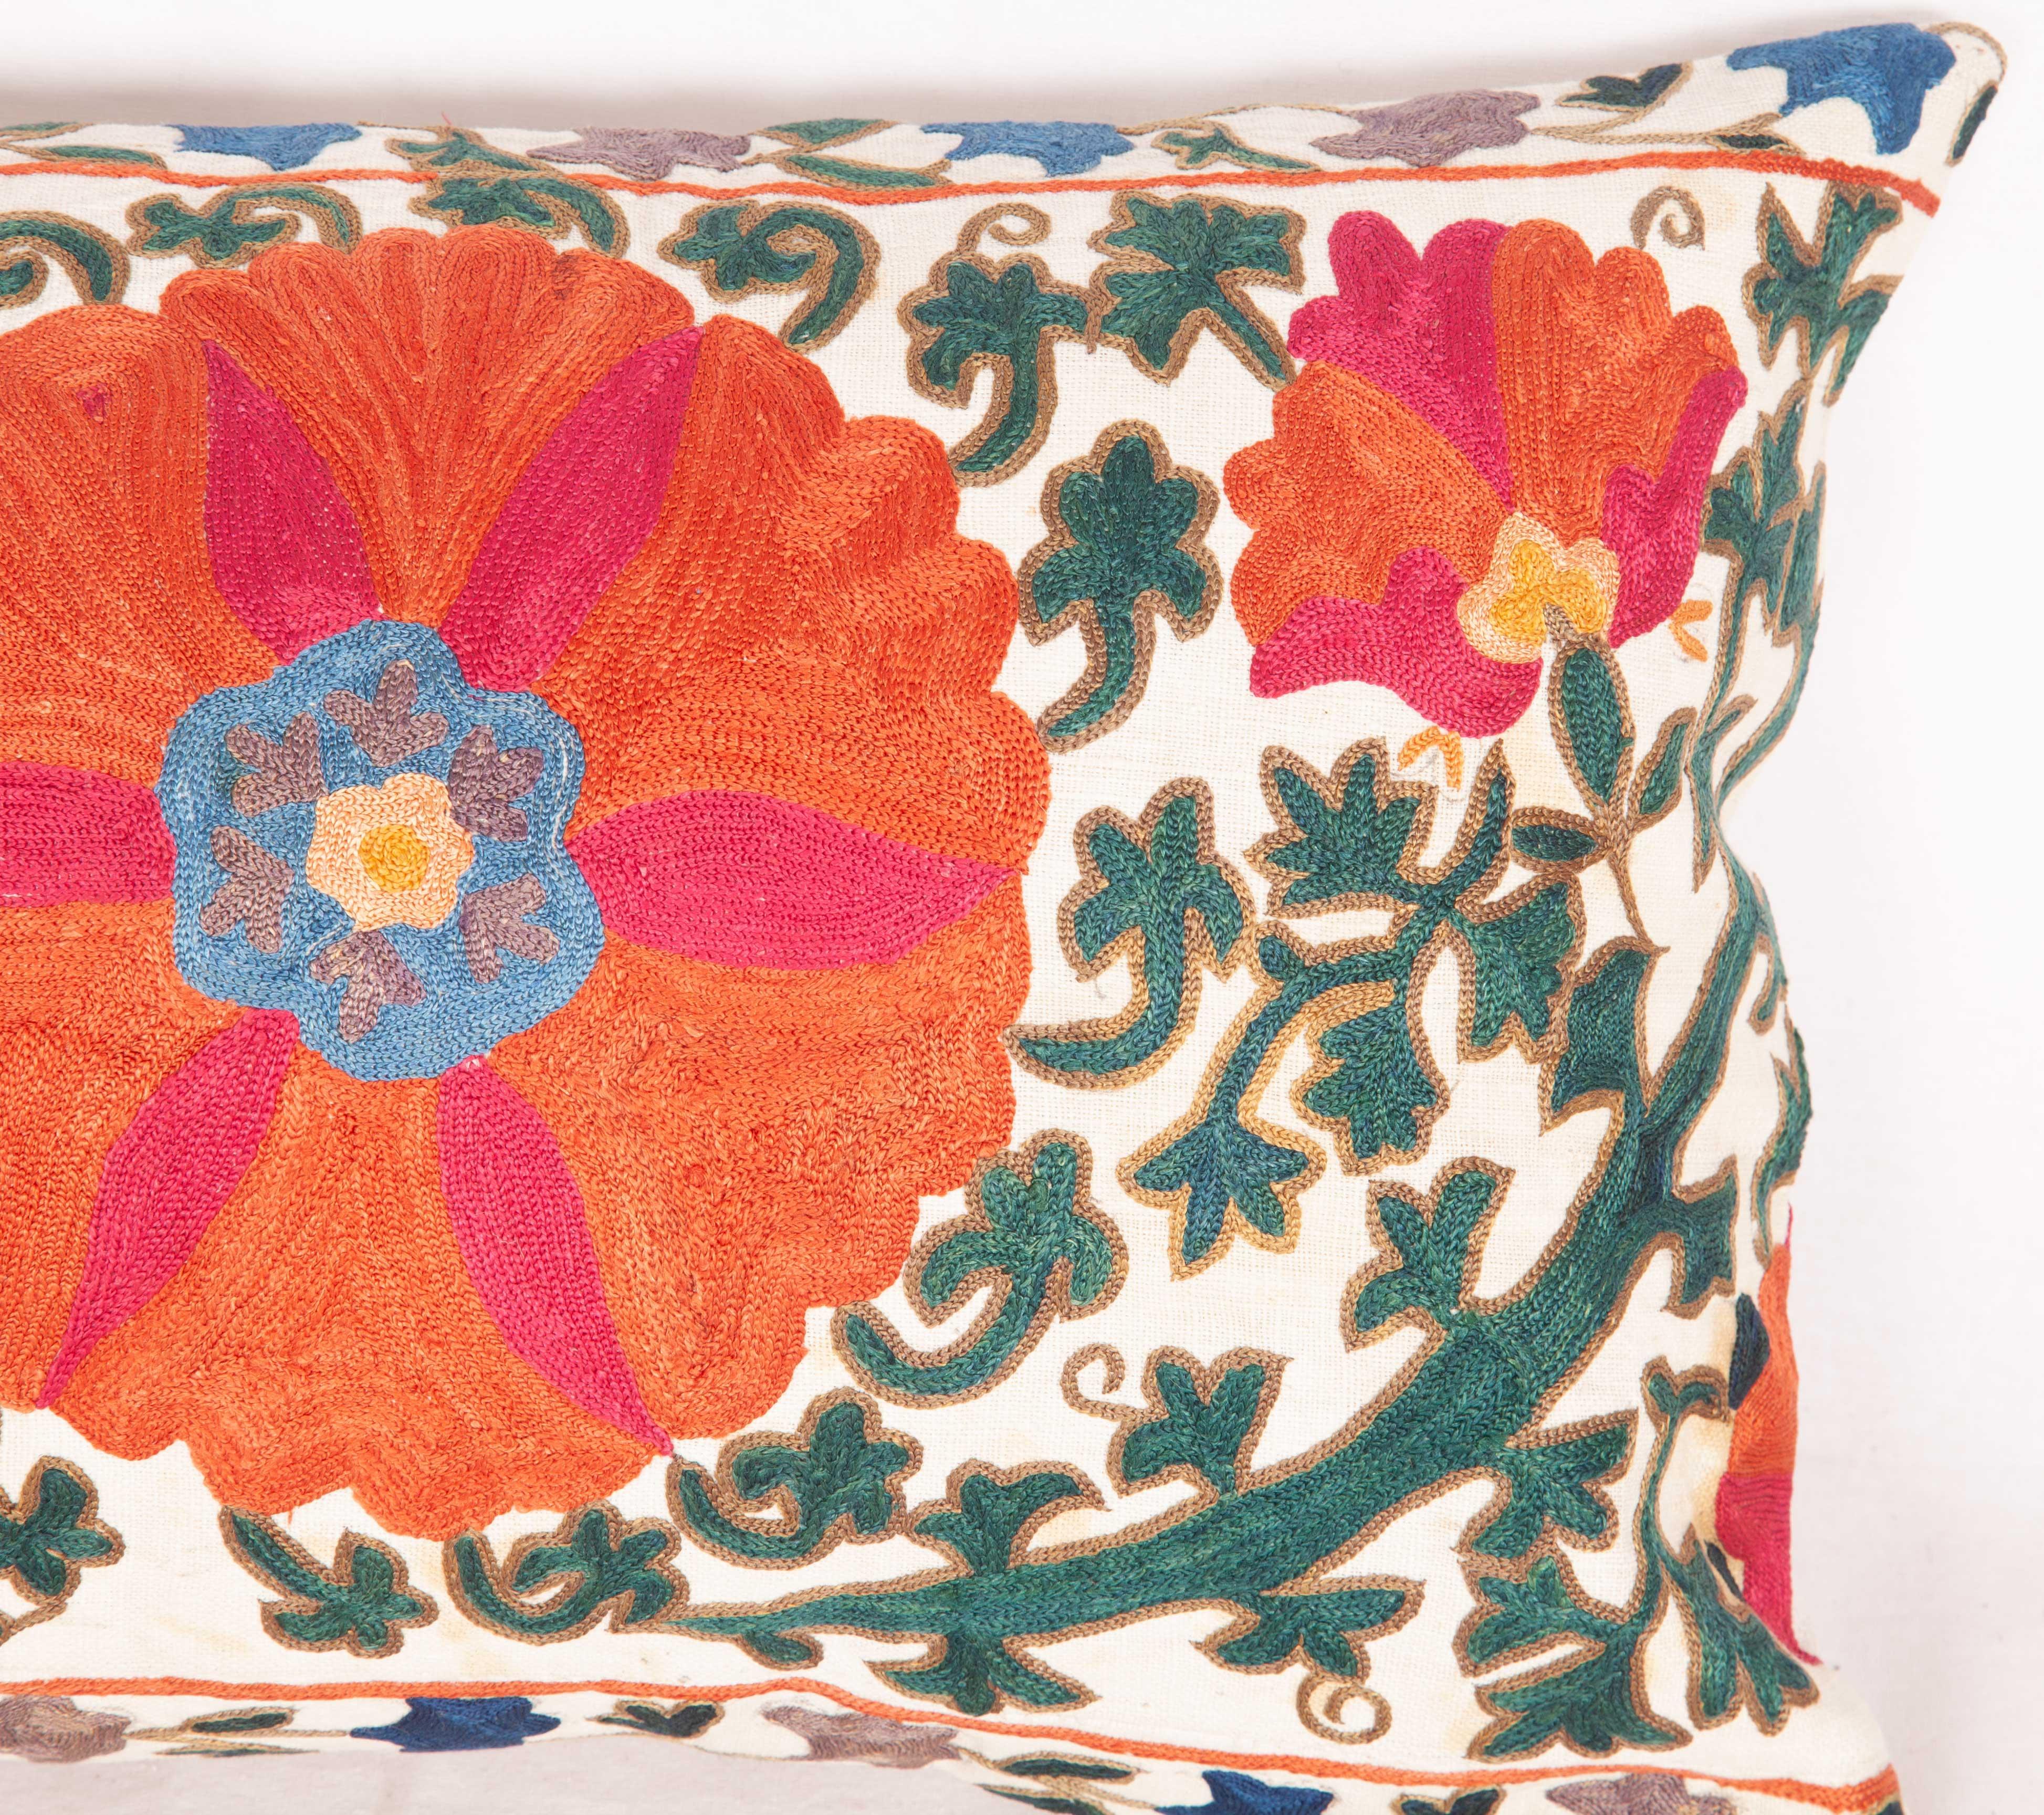 Embroidered Antique Suzani Lumbar Pillow Case Fashioned from a 19th Century Bukhara Suzani